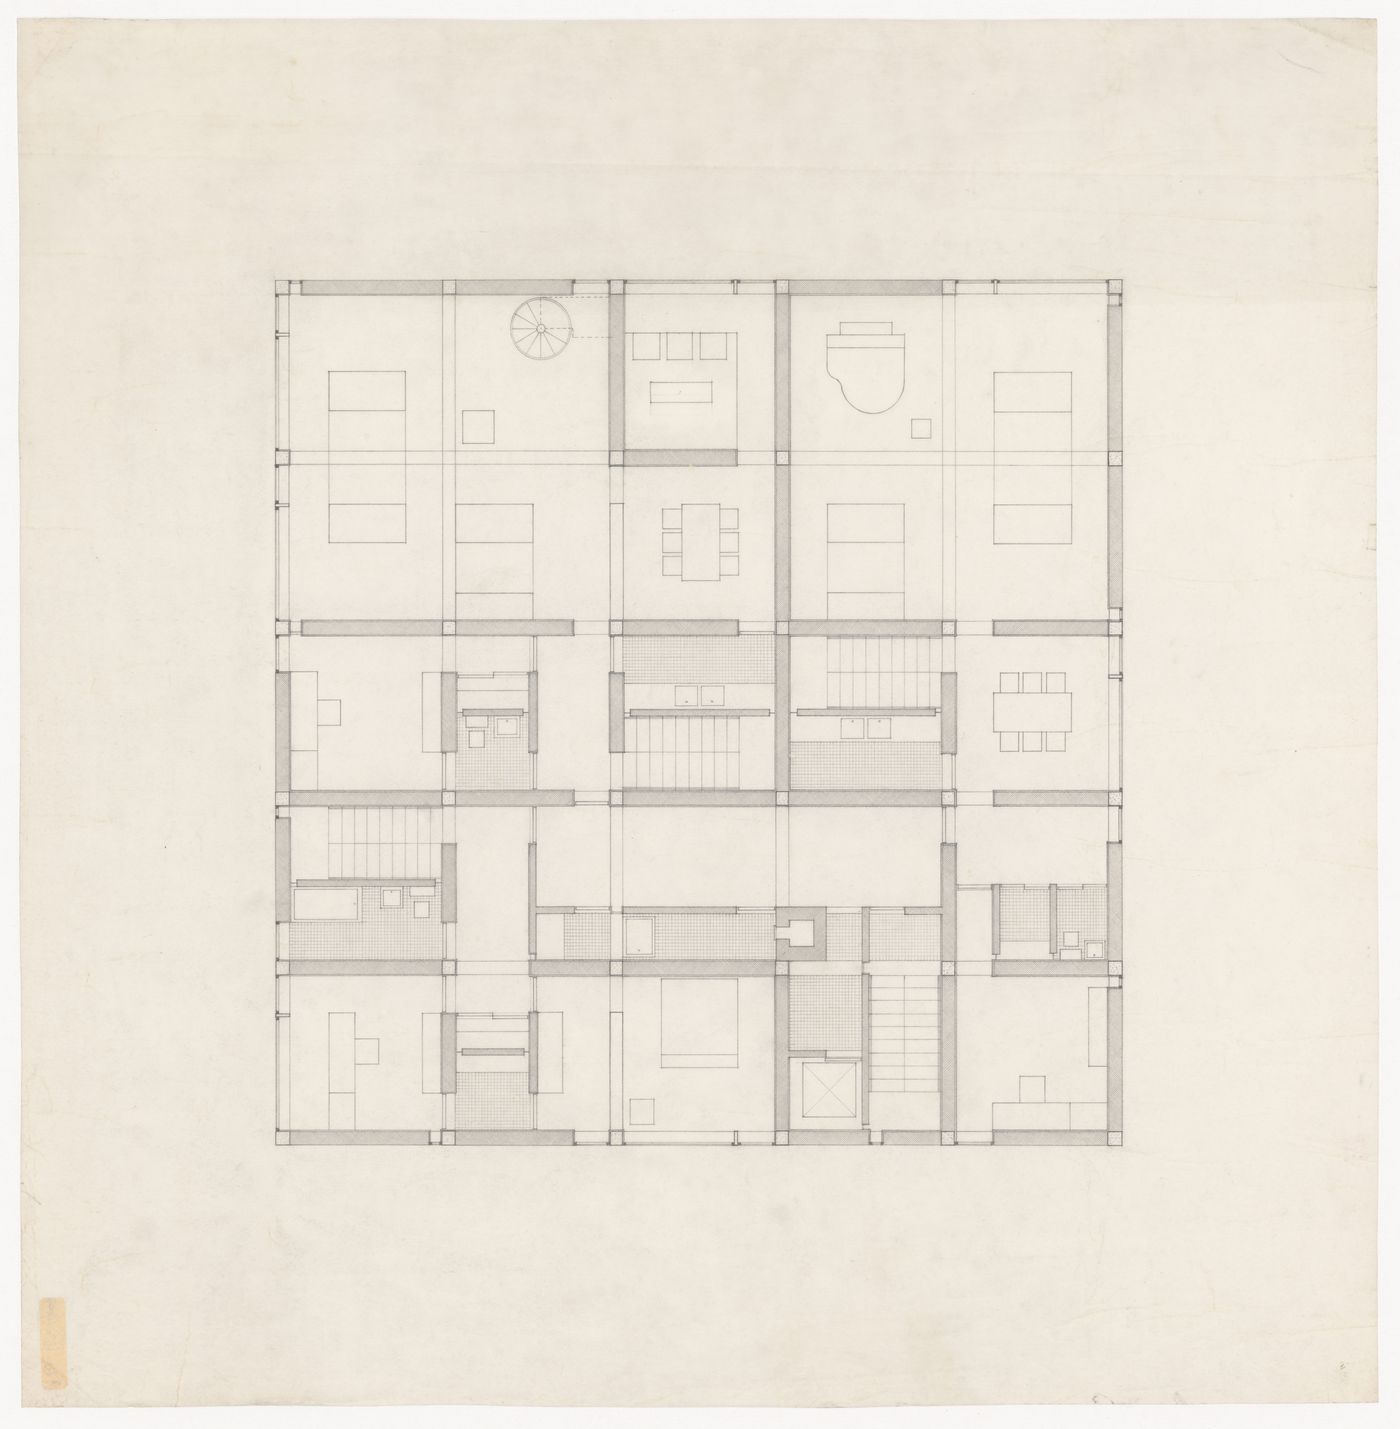 Plan for Apartment House